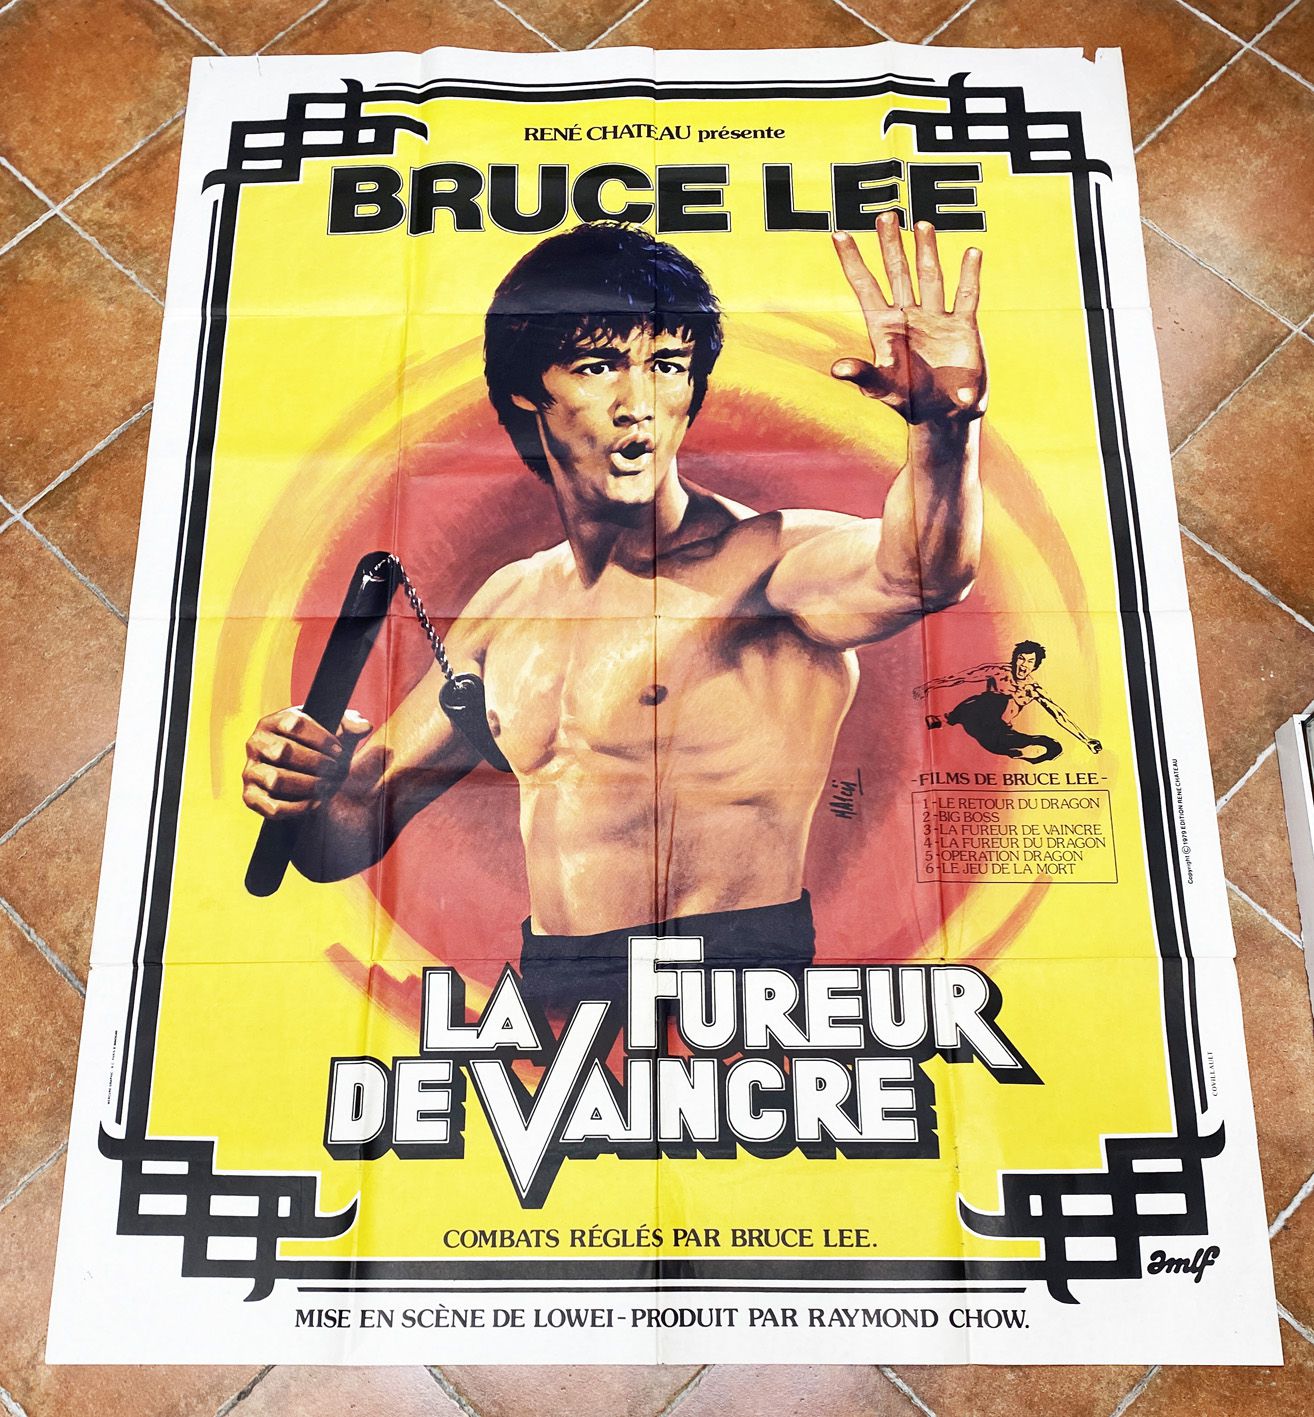 Bruce Fist of Fury - Poster 120x160cm - René Chateau (1979)